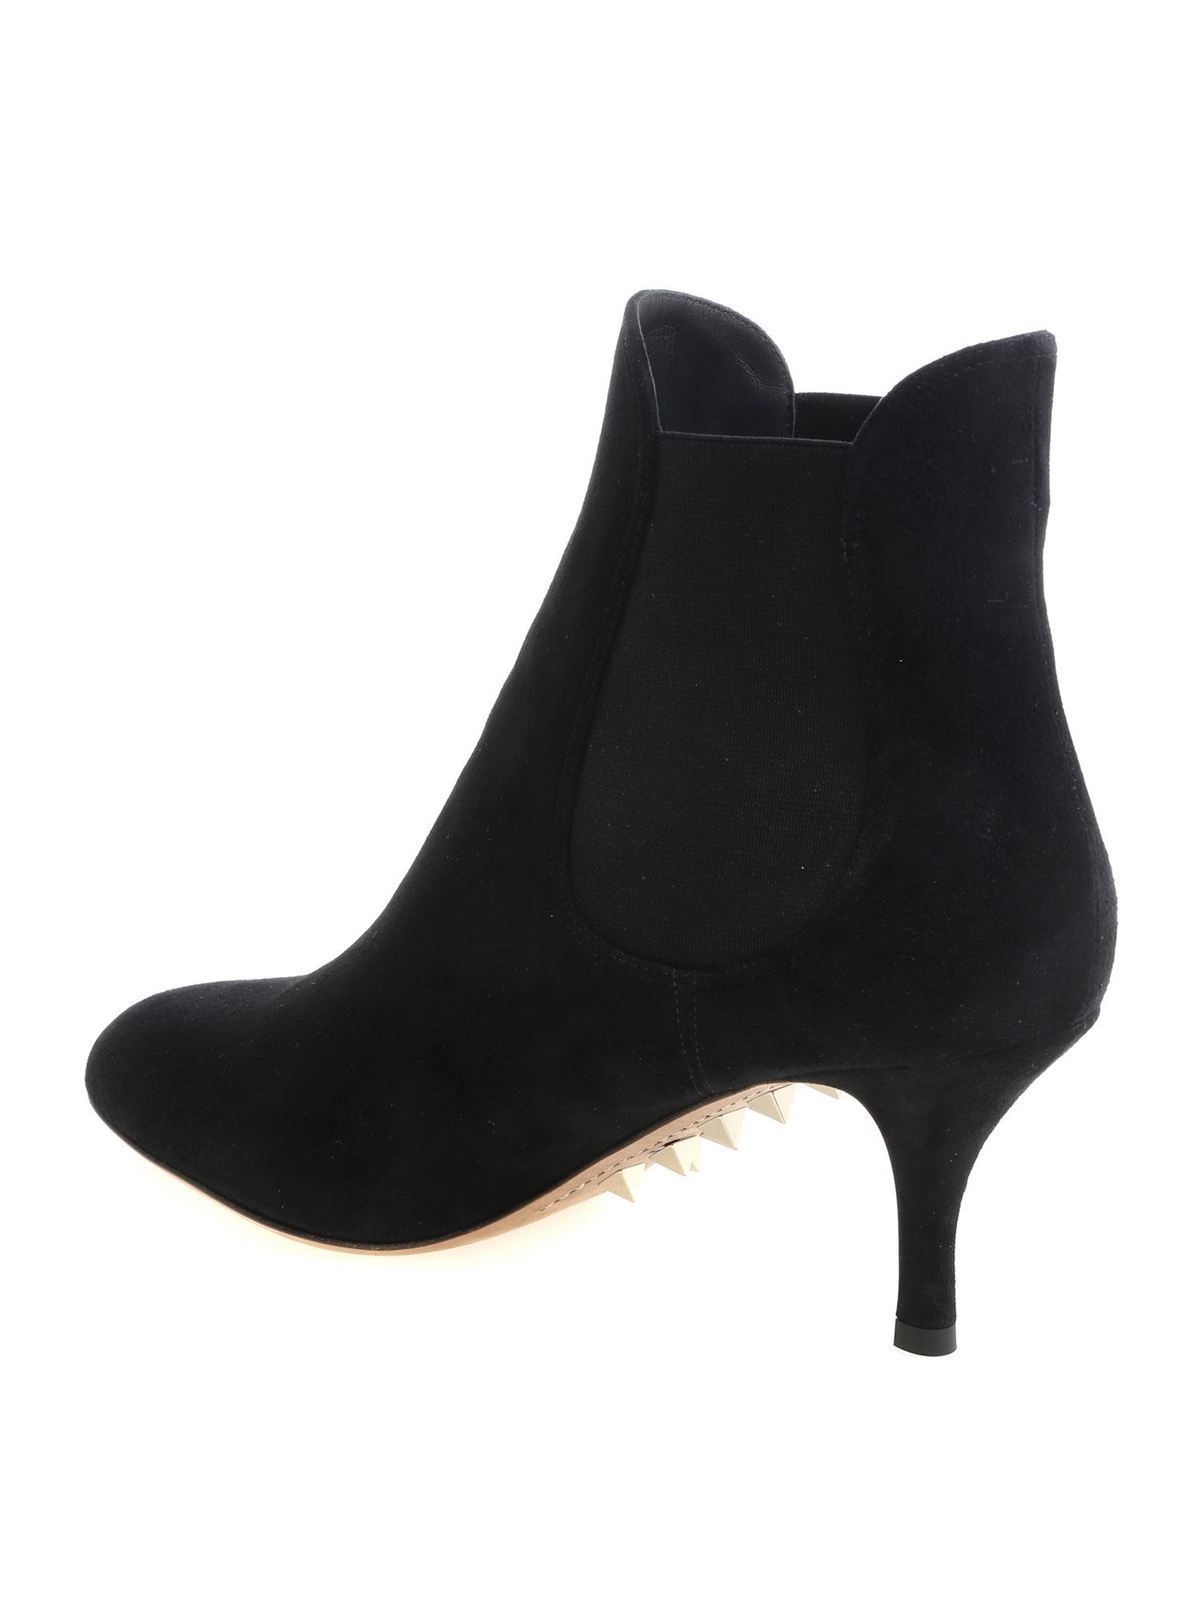 valentino suede ankle boots